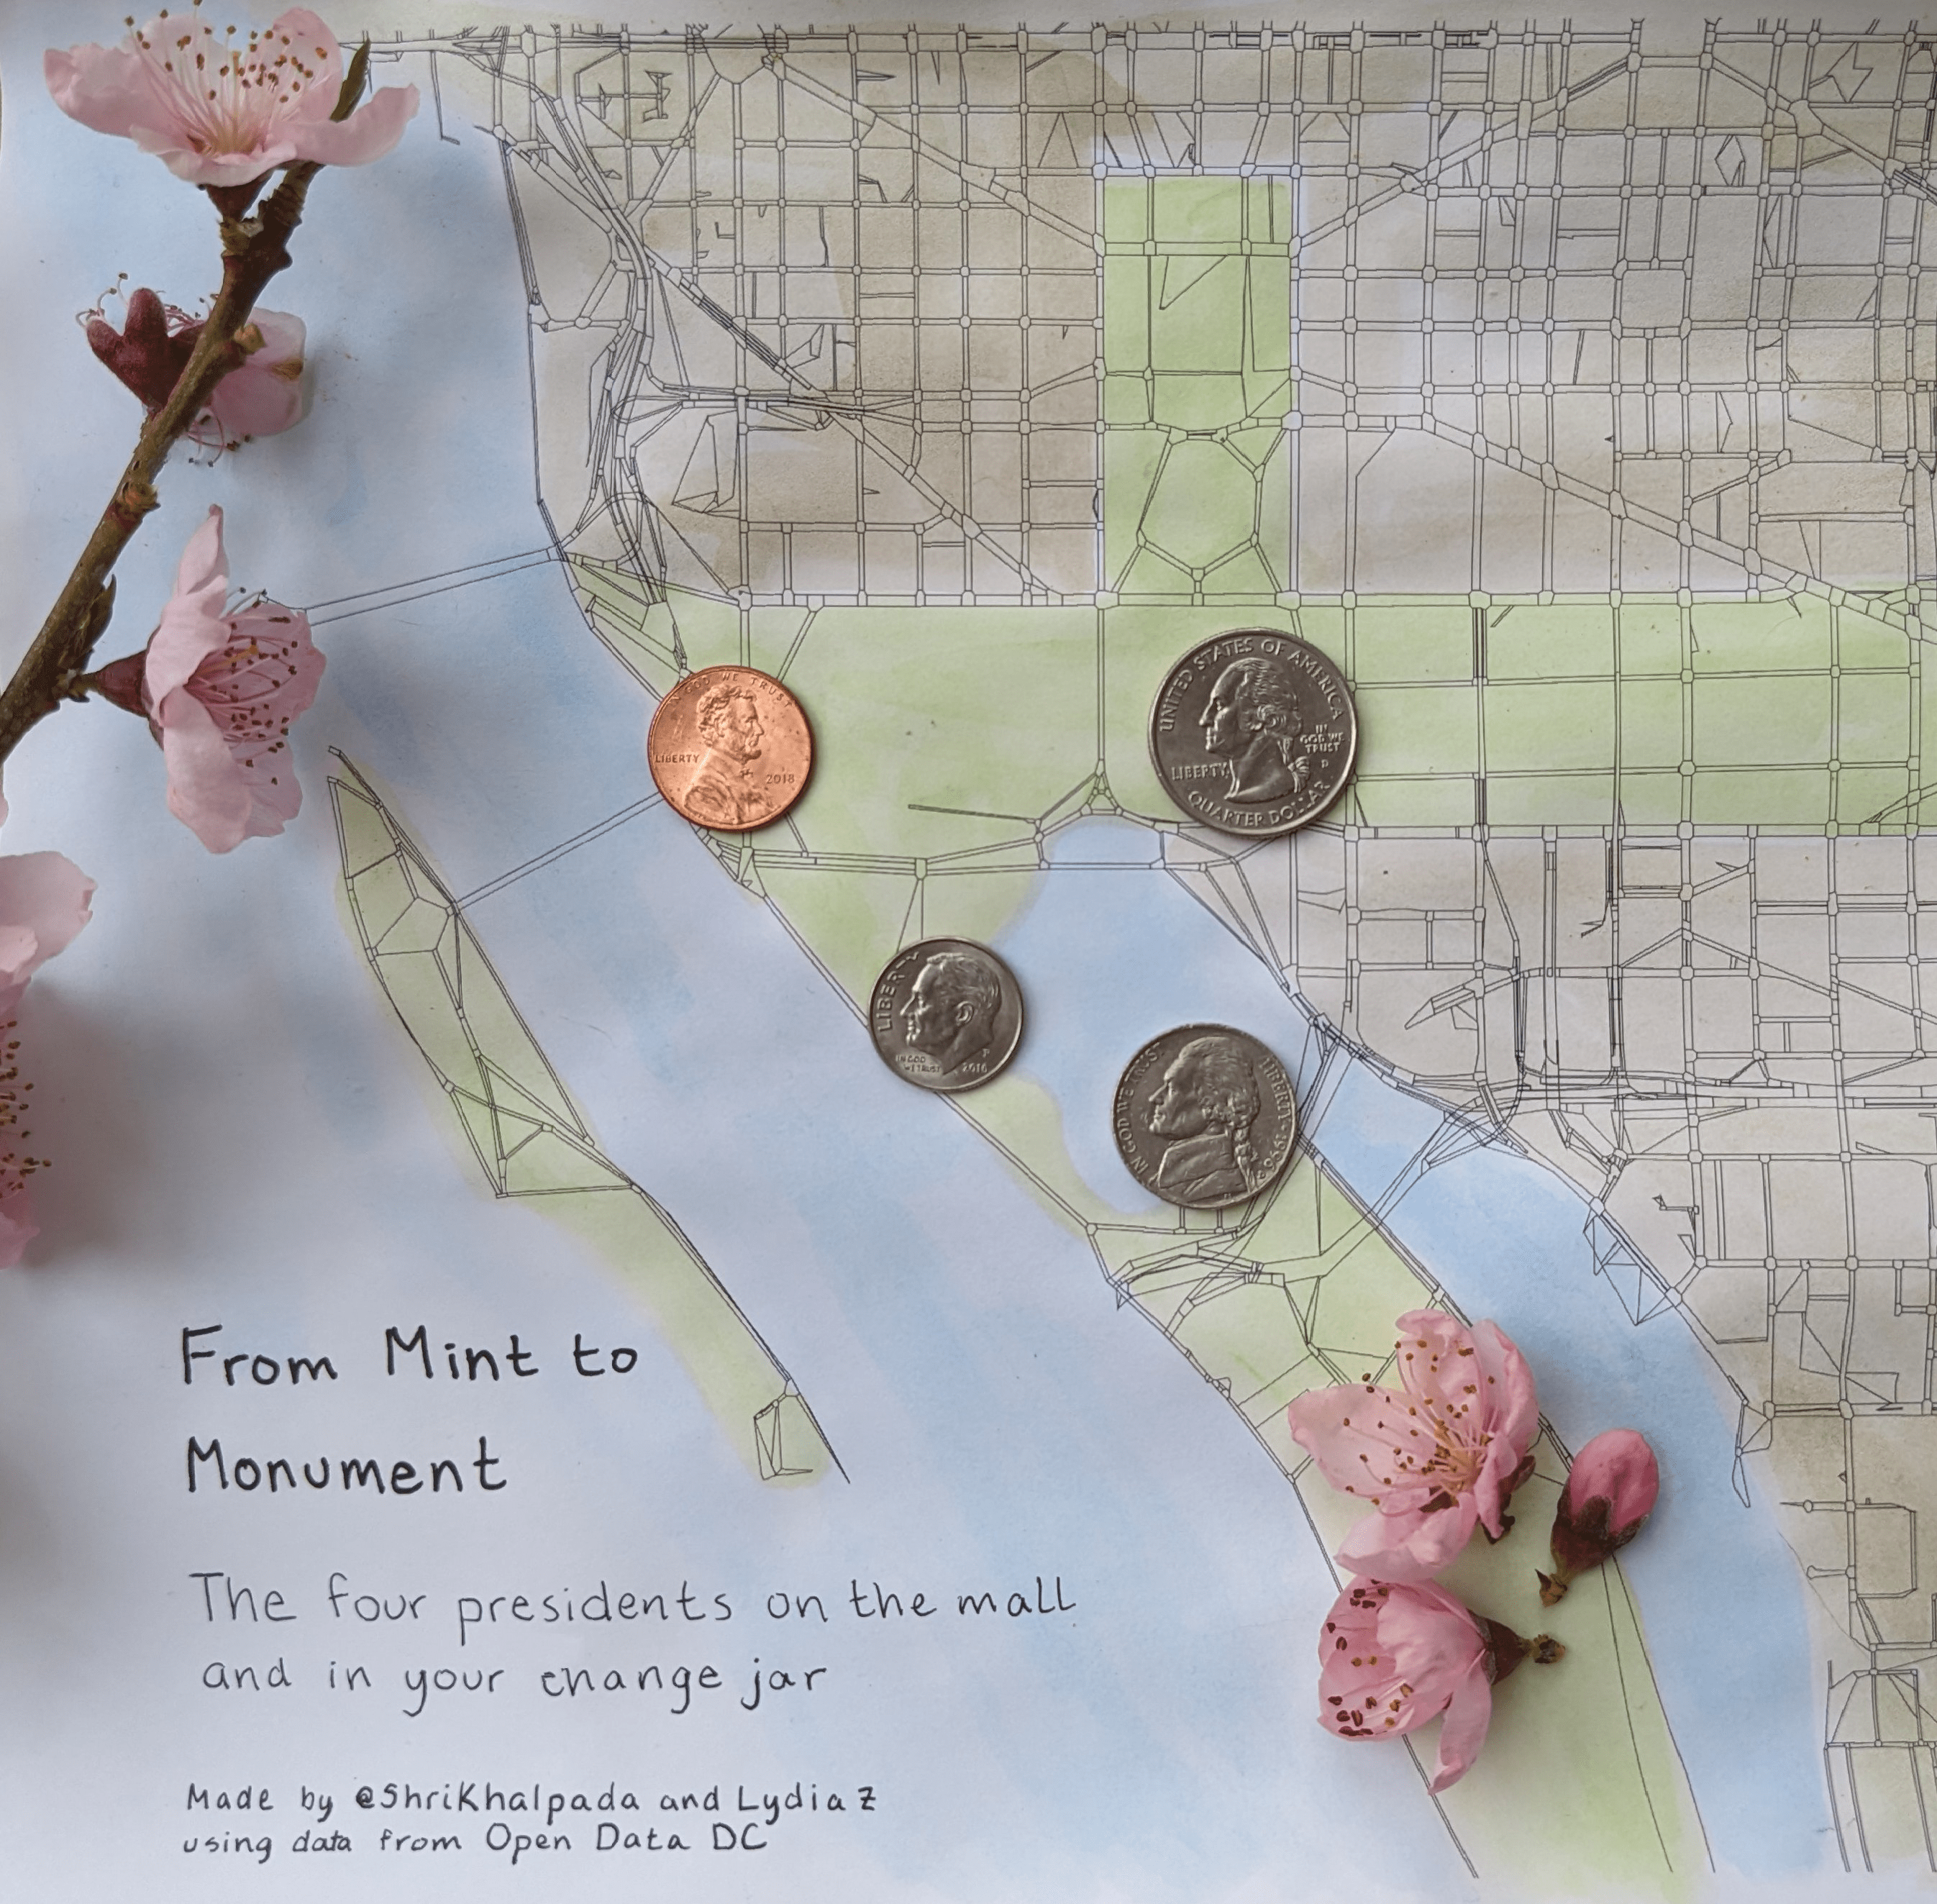 An artistic map titled "From Mint to Monument," with coins placed on key locations on a map of Washington D.C., alongside cherry blossoms.